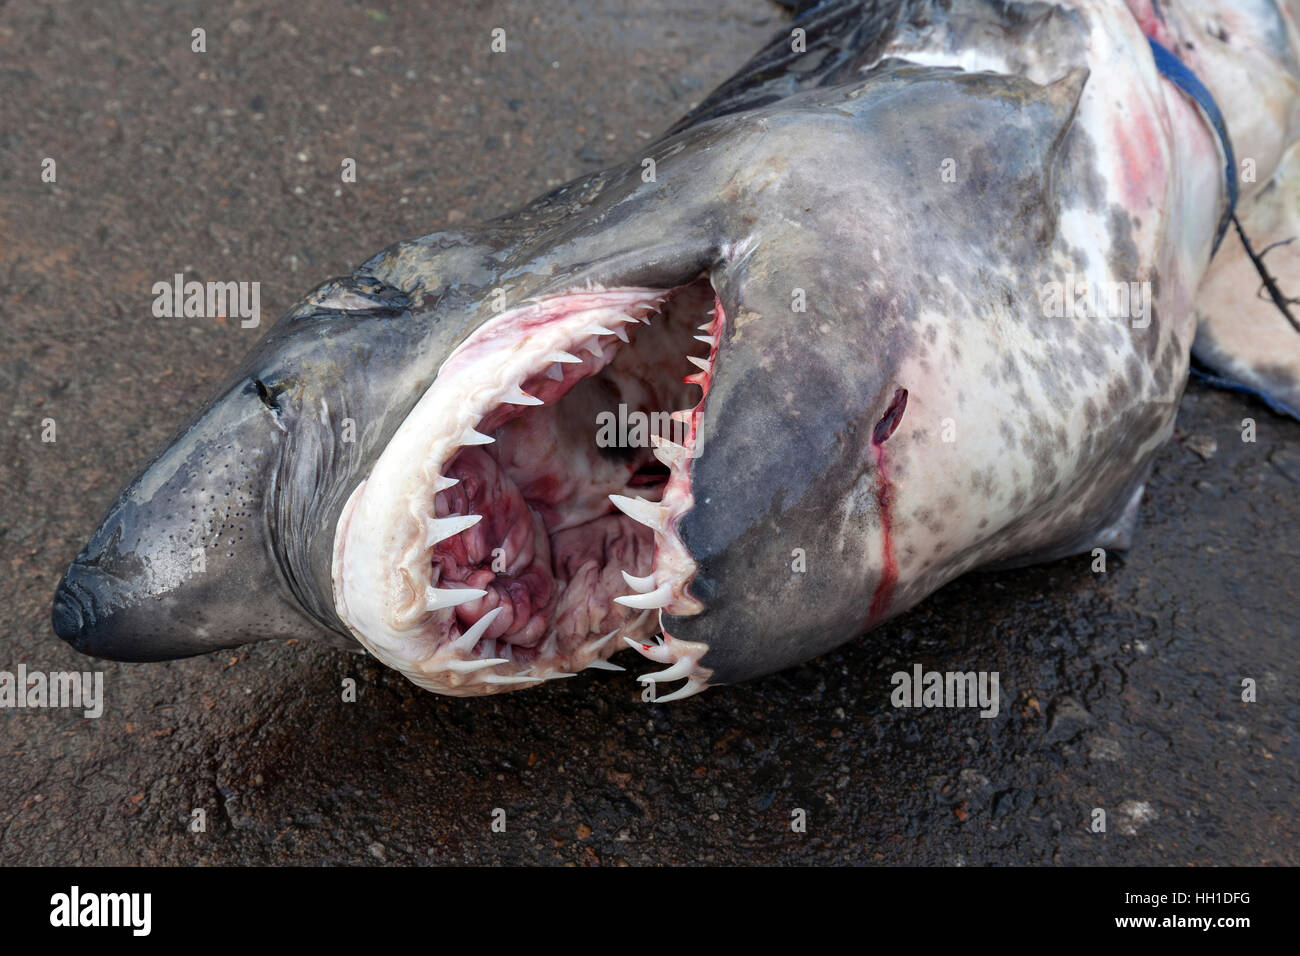 Great white shark (Carcharodon carcharias) on ground, open mouth with sharp teeth, fish market, Beruwela, Western Province Stock Photo